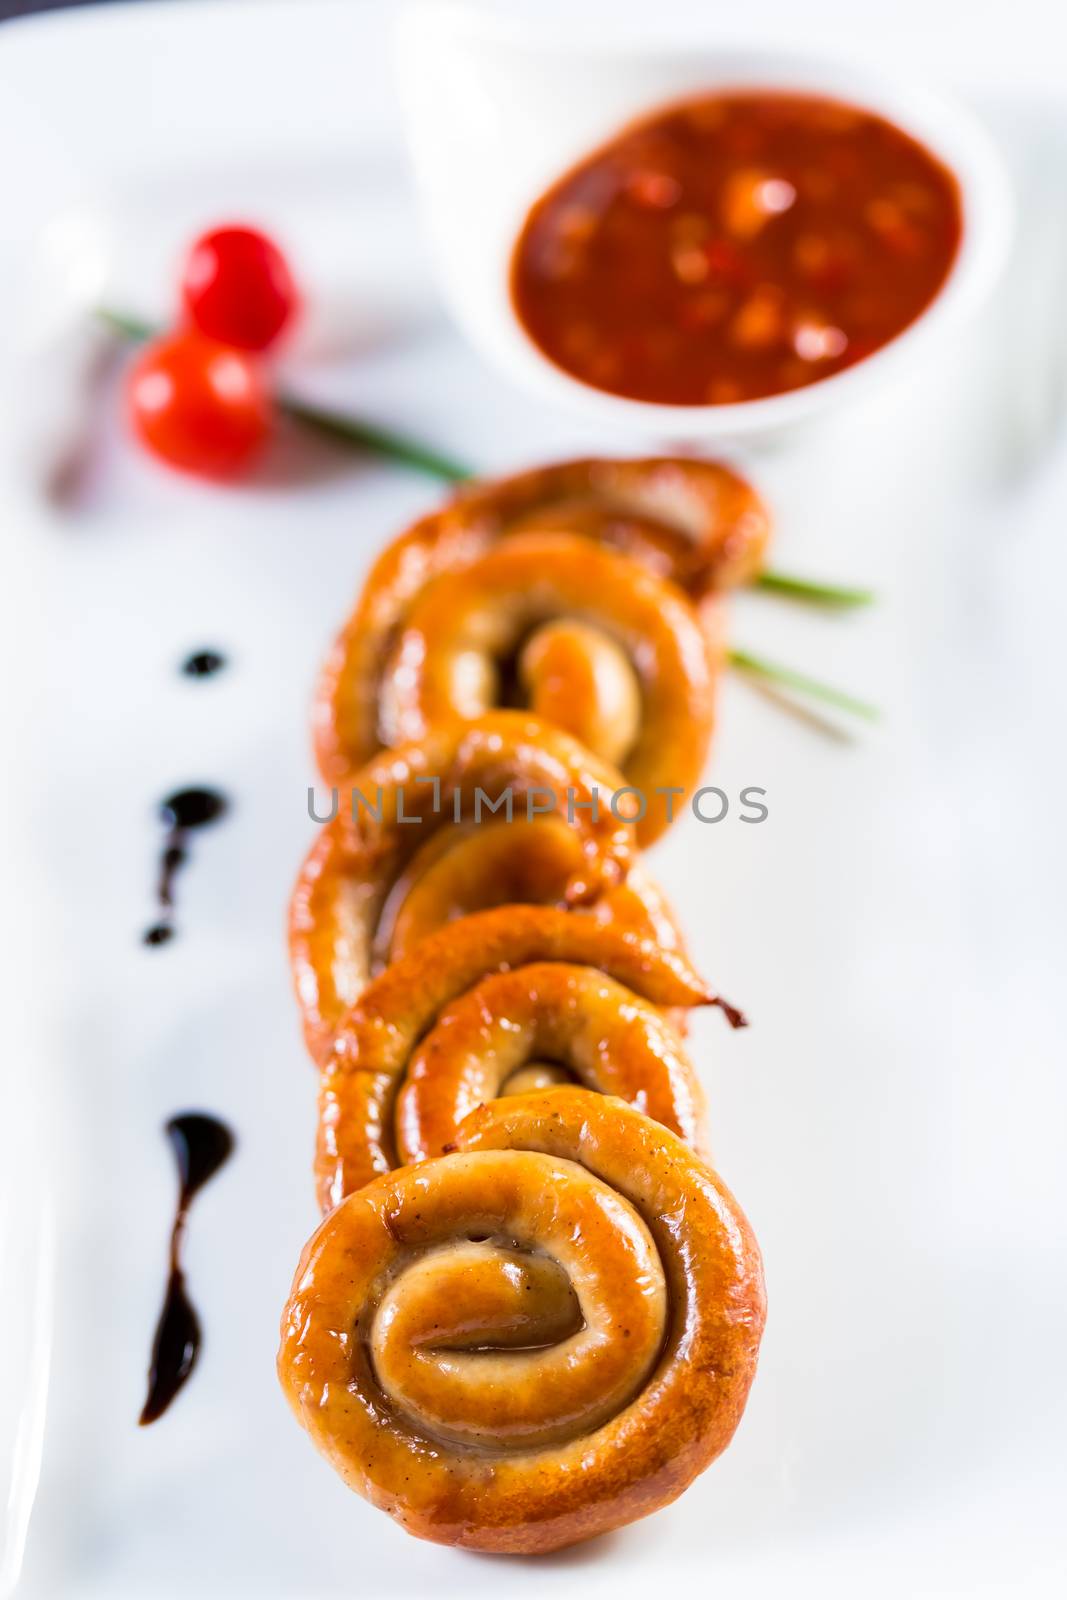 organic grilled sausages on a white plate. close-up